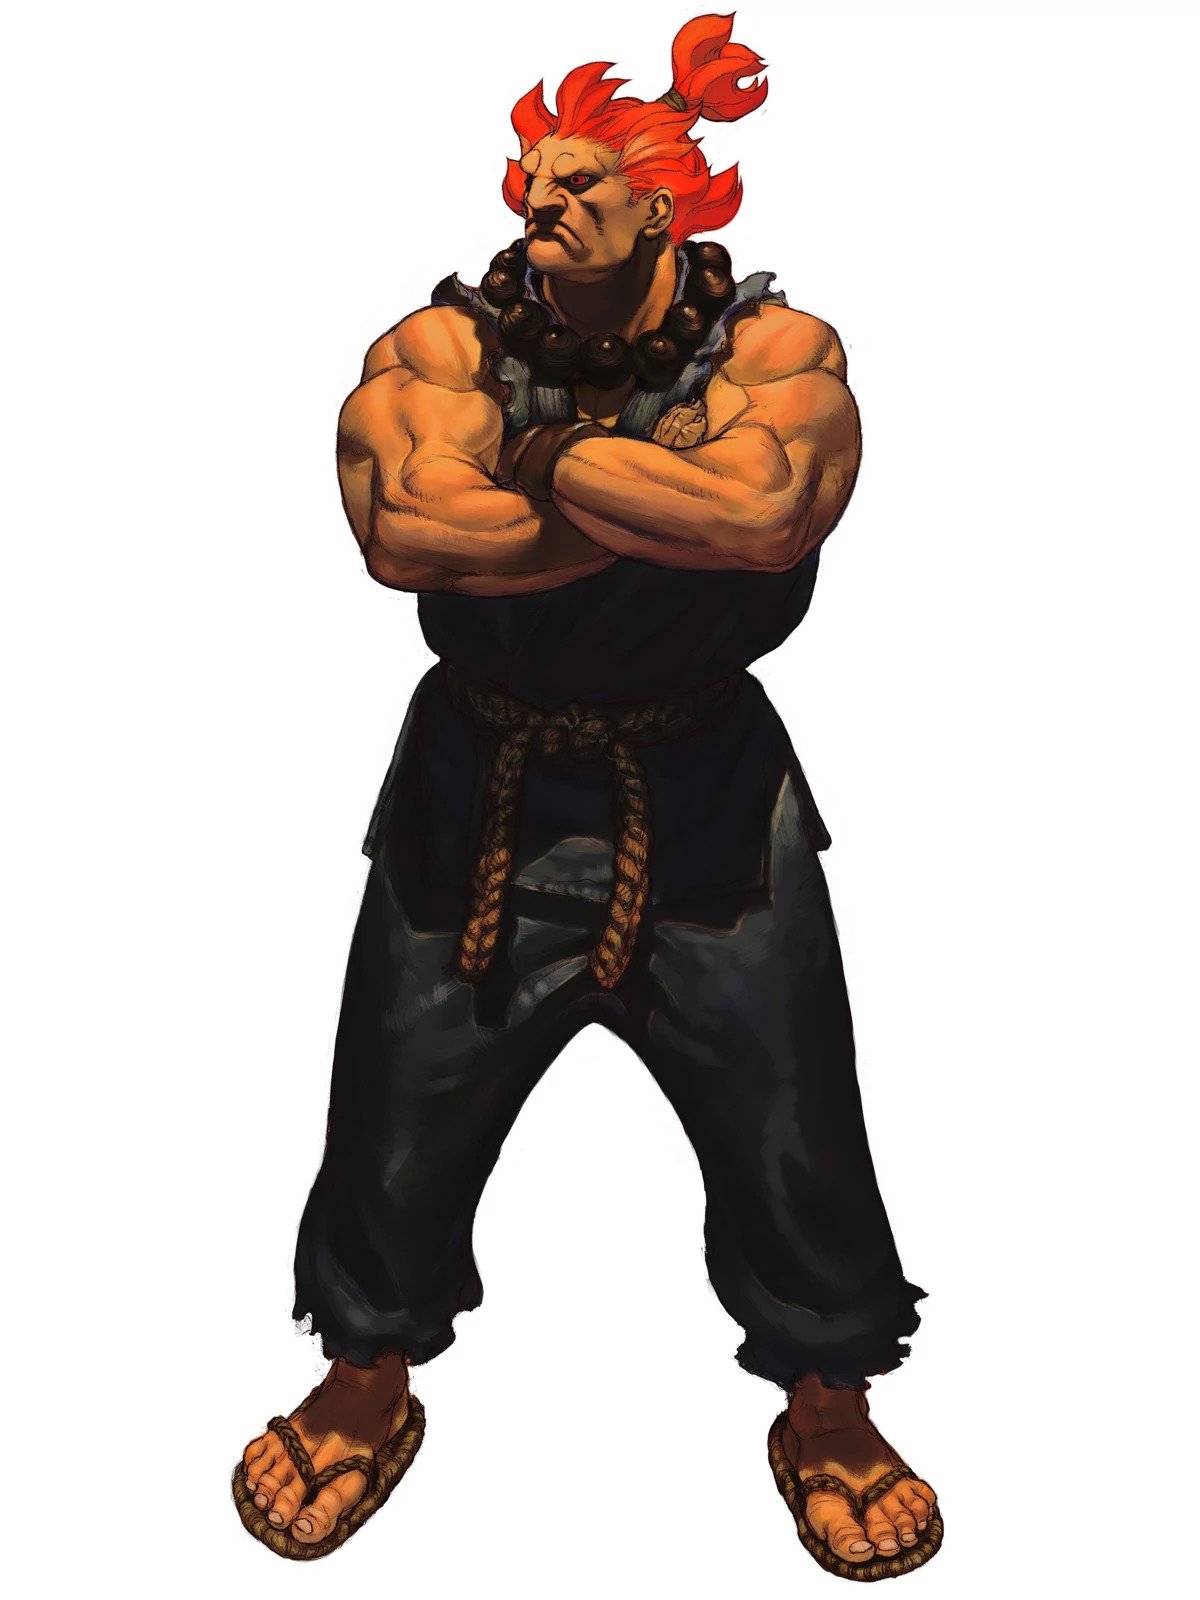 Did Capcom accidentally show off an early version of Akuma's model